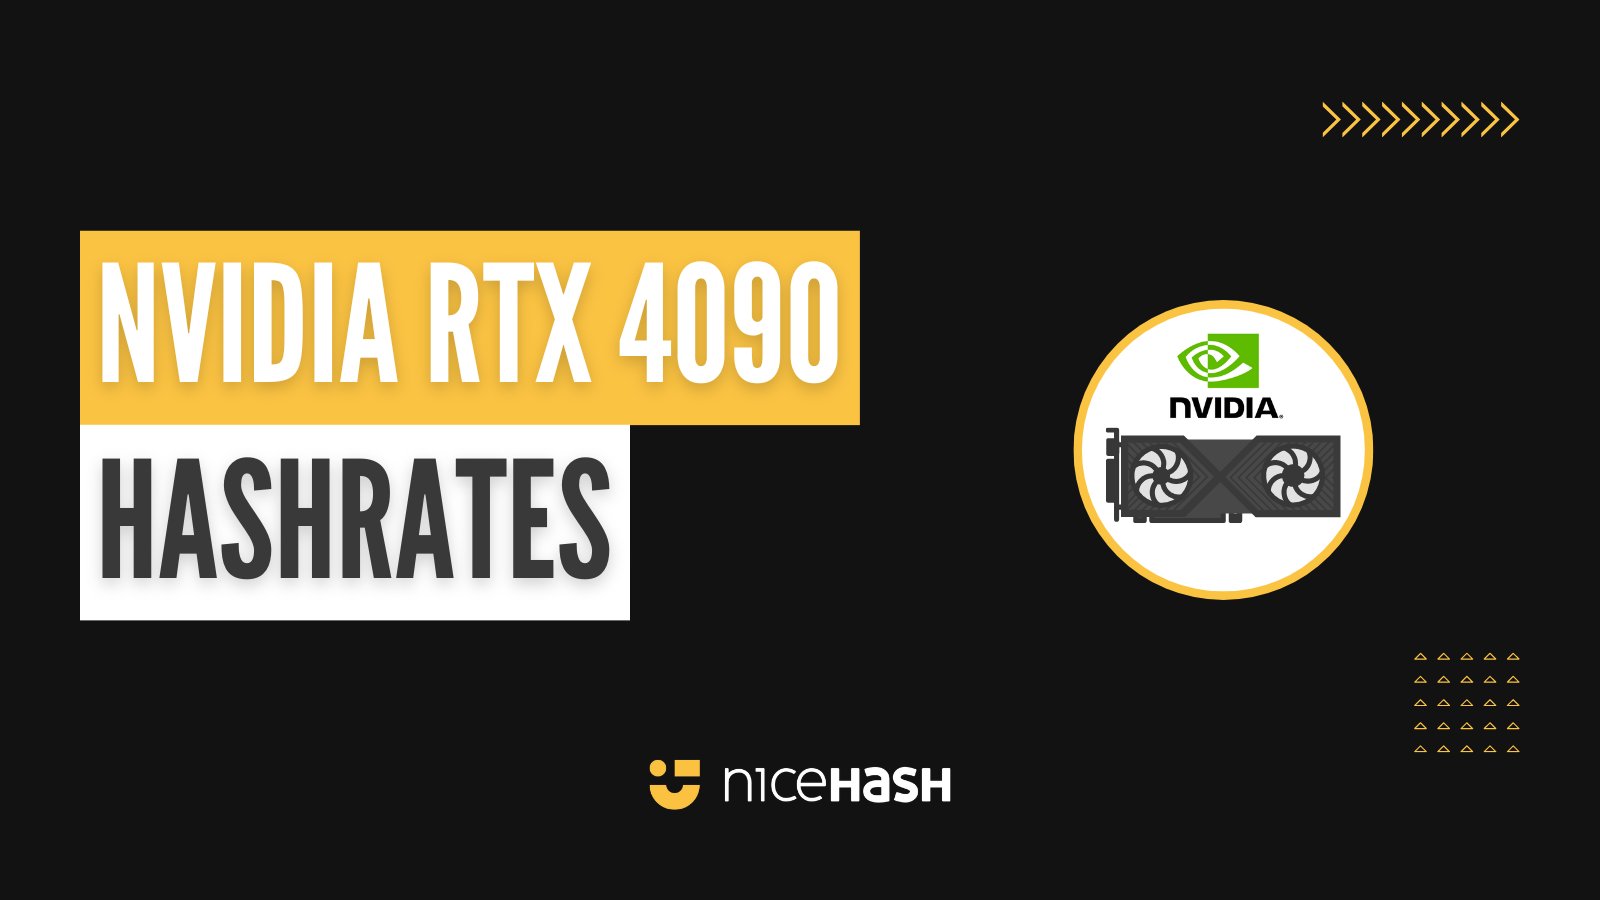 NiceHash on Twitter: "Just a few days ago, @nvidia launched the RTX 4090,  claiming the new #GPU achieves 2-4x the performance of a RTX 3090 Ti in  games. How could its #mining